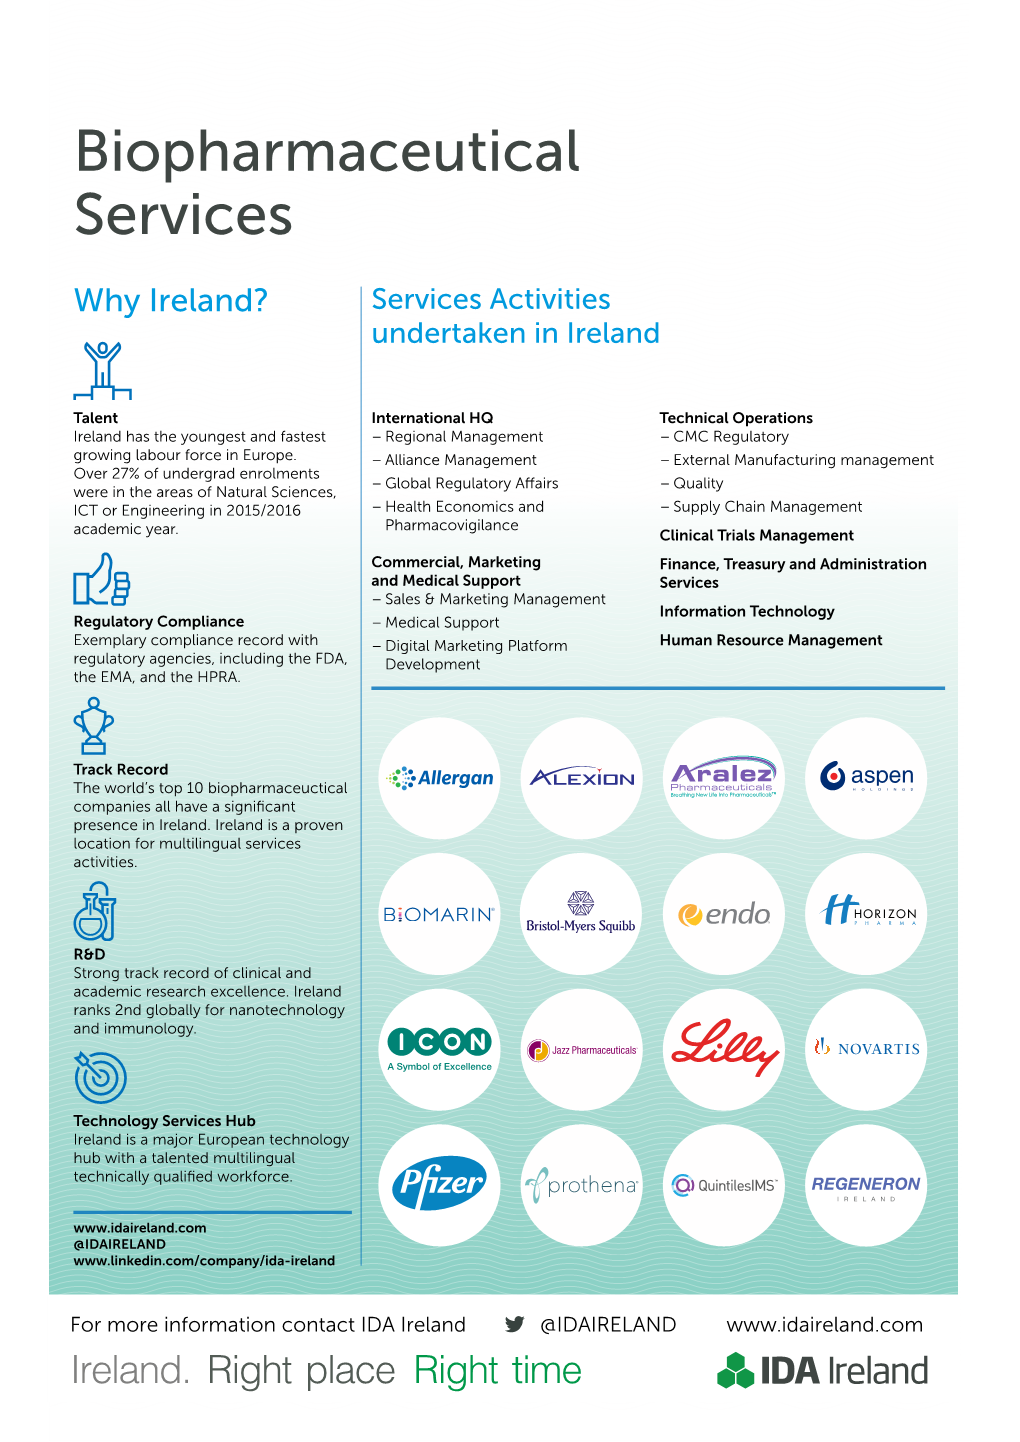 Biopharmaceutical Services